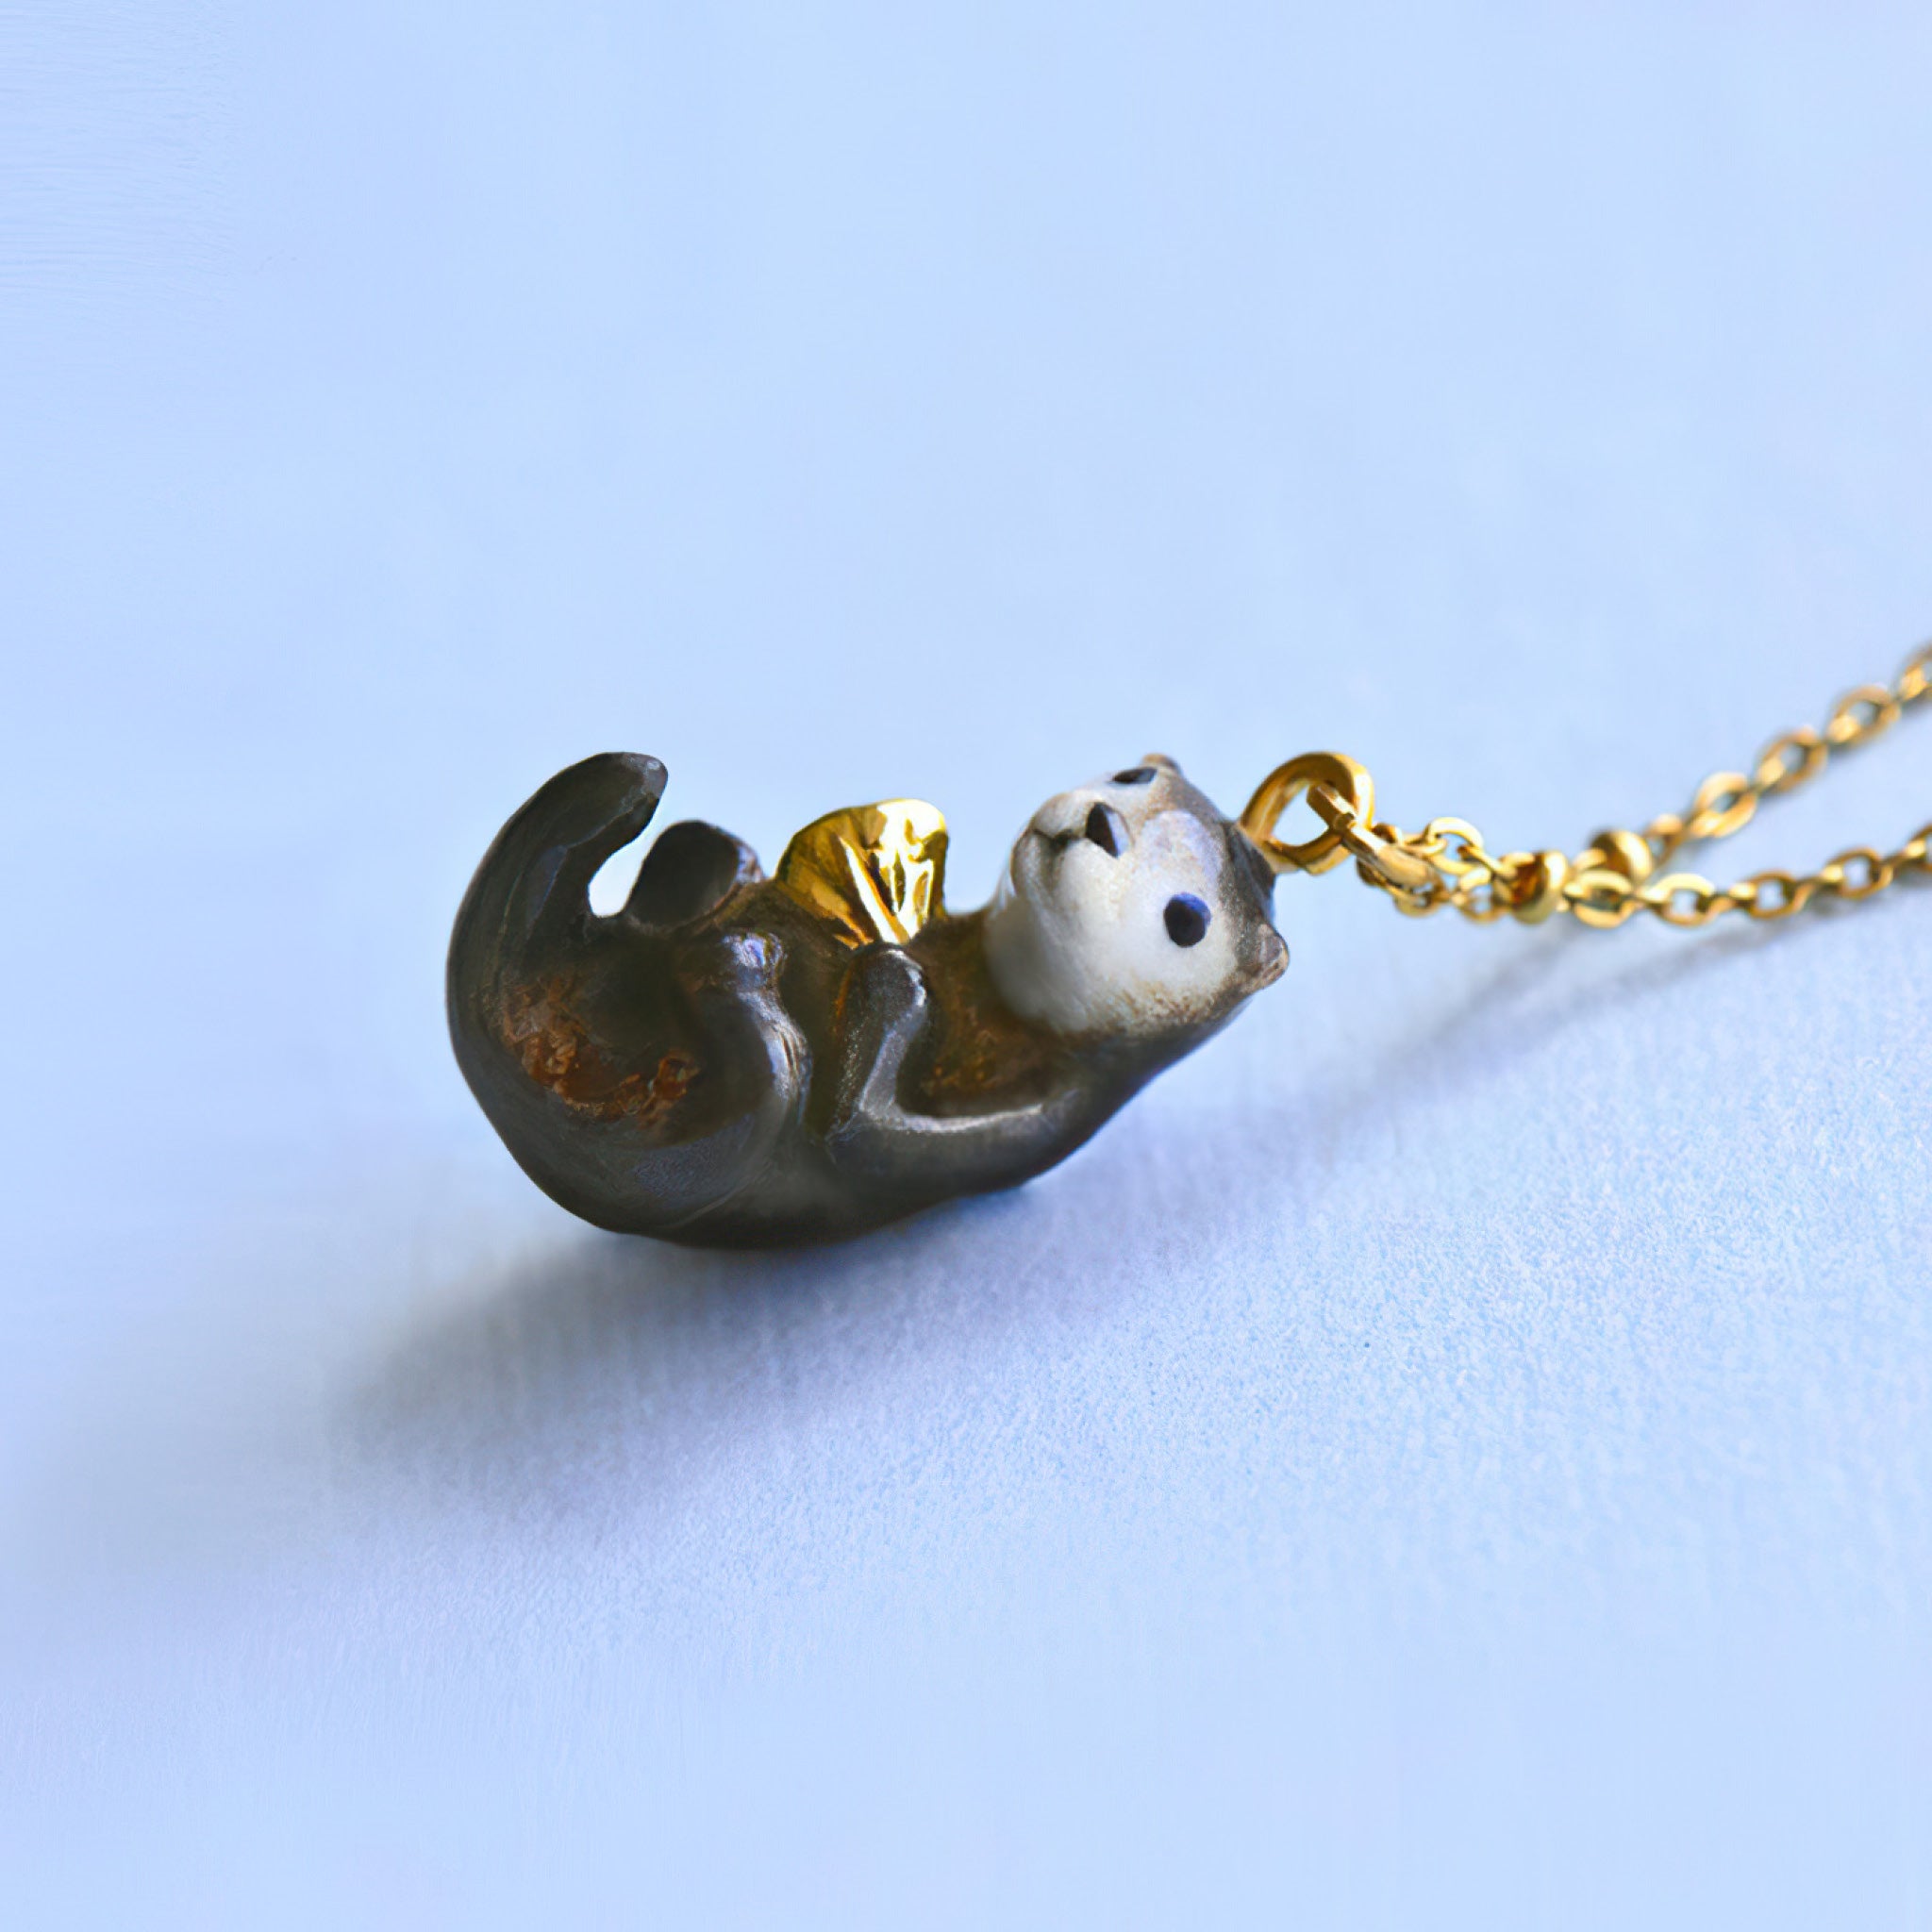 Otter Necklace | Camp Hollow Ceramic Animal Jewelry